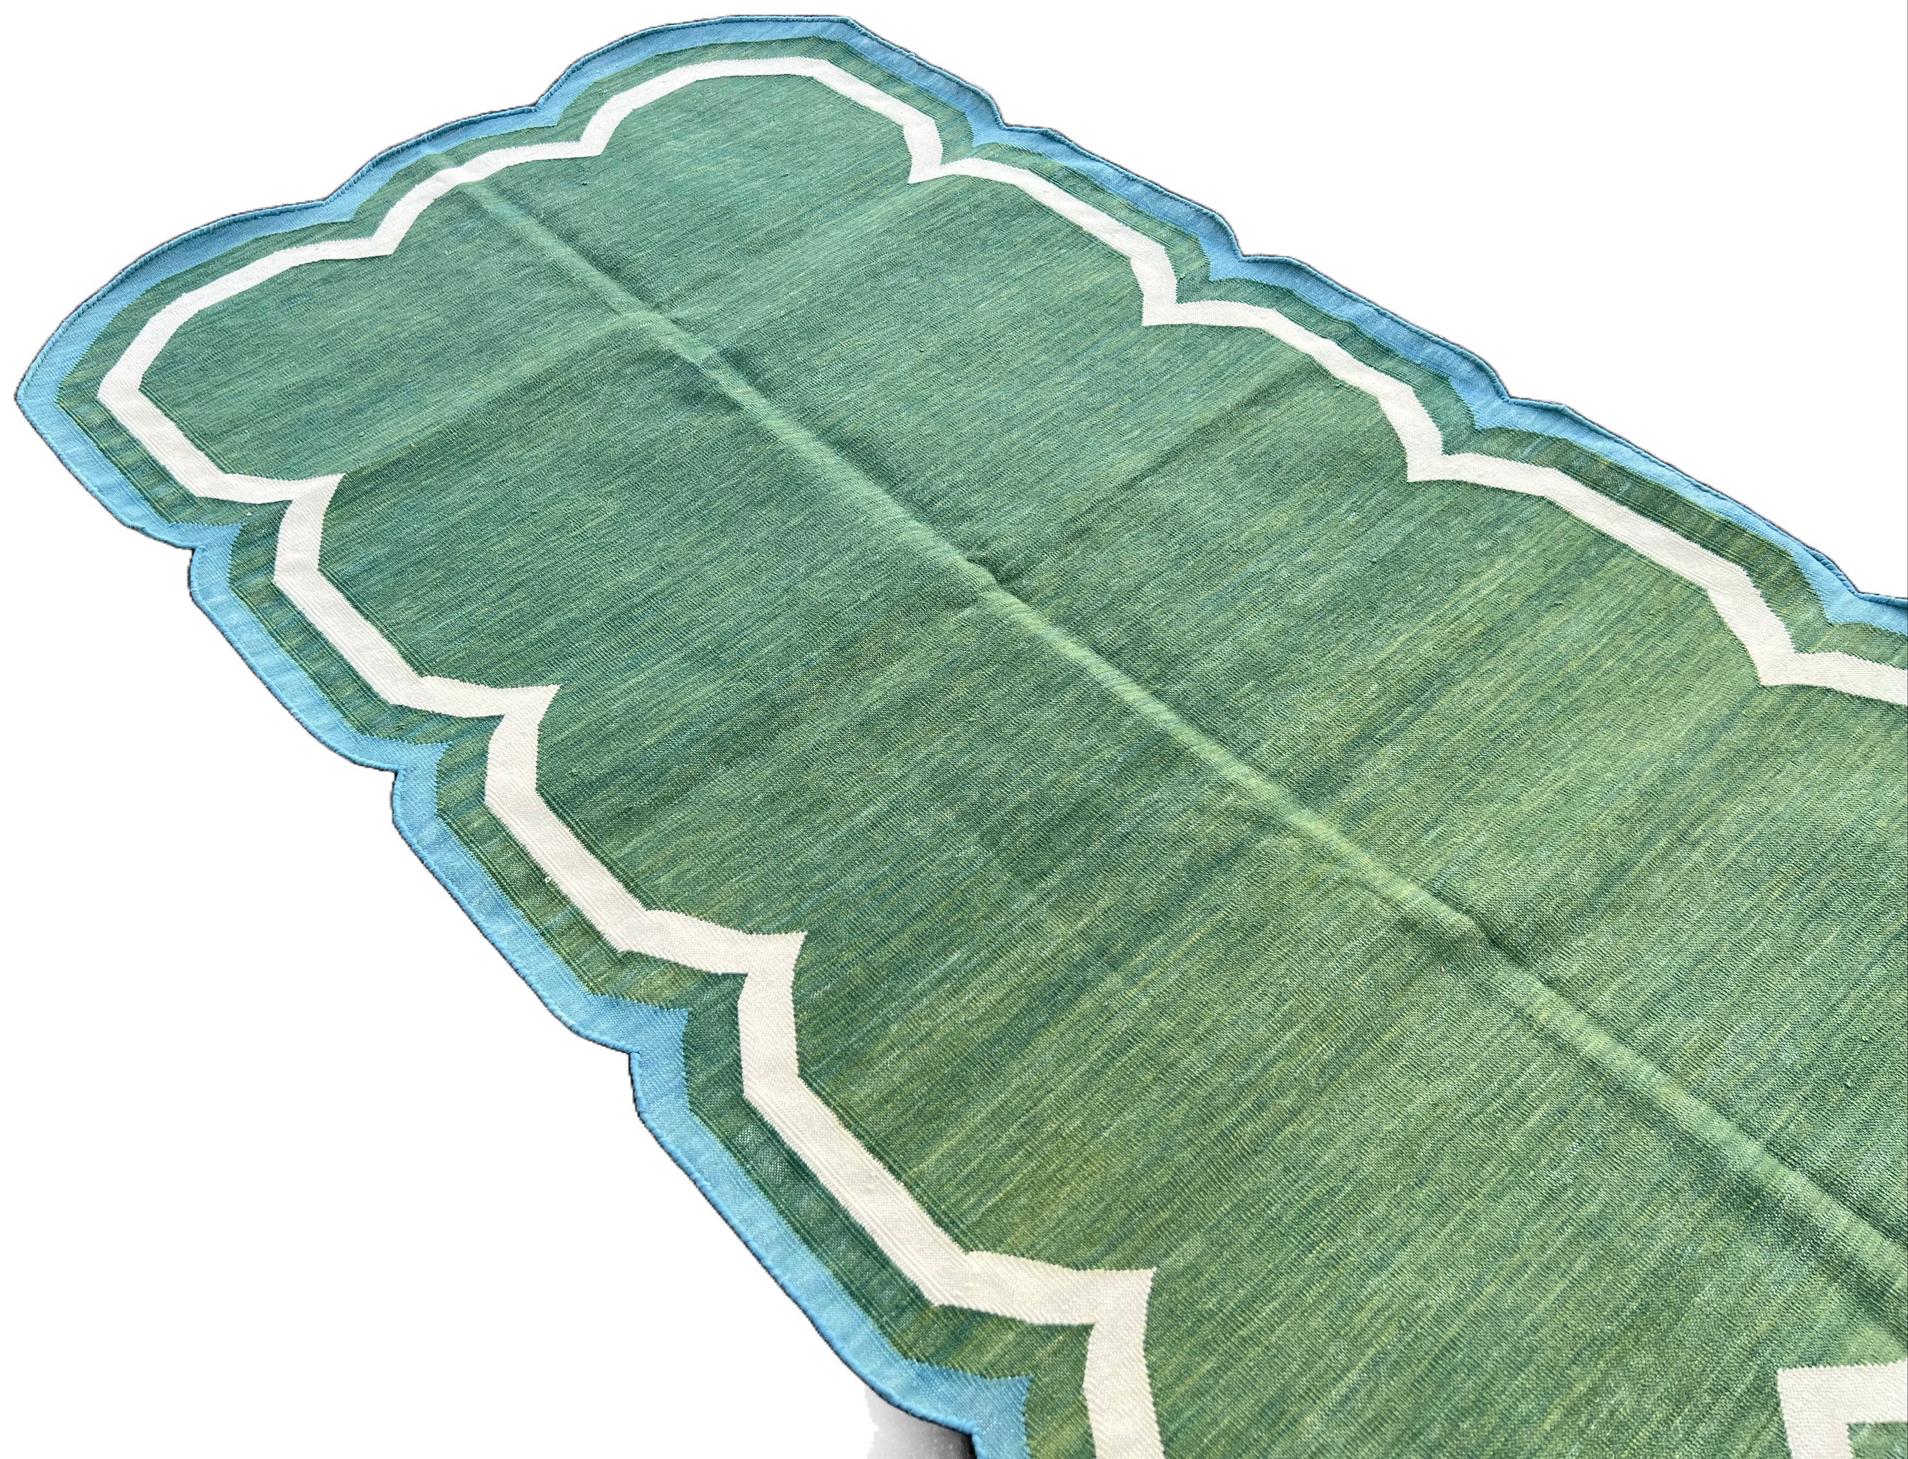 Hand-Woven Handmade Cotton Area Flat Weave Rug, 3x5 Green And Blue Scalloped Kilim Dhurrie For Sale